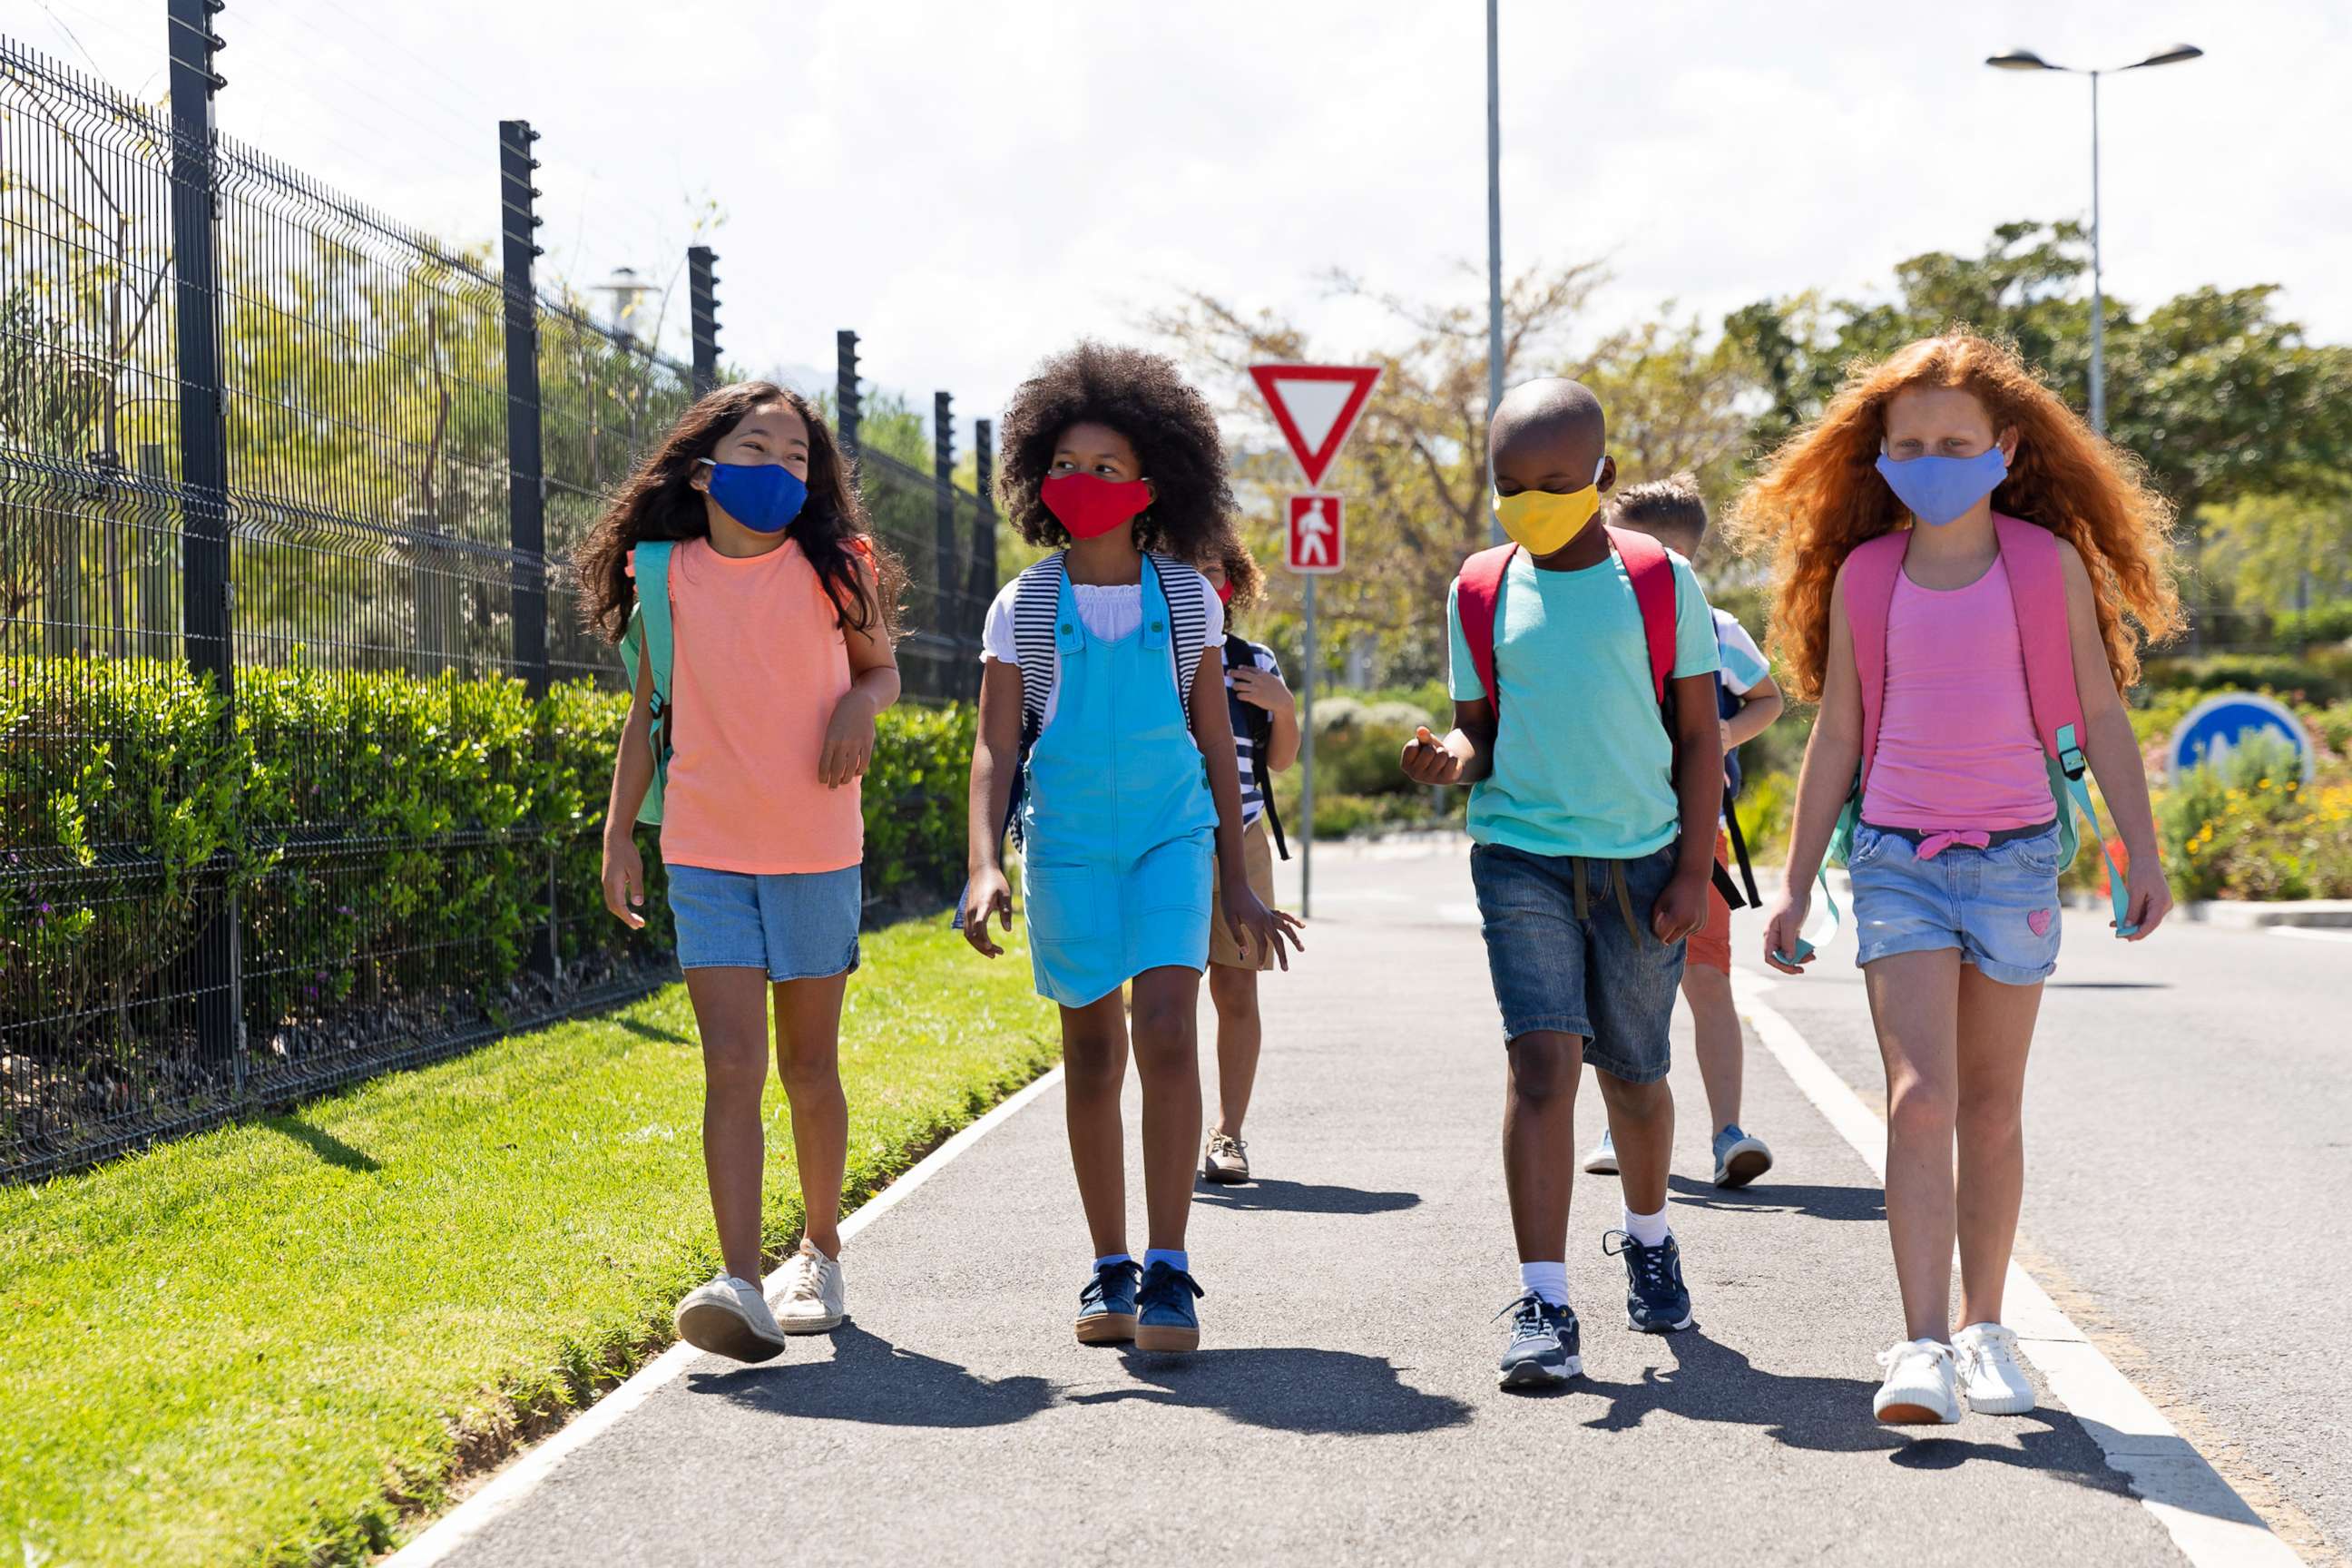 PHOTO: School children wearing face masks are pictured walking on the street in this undated stock image.